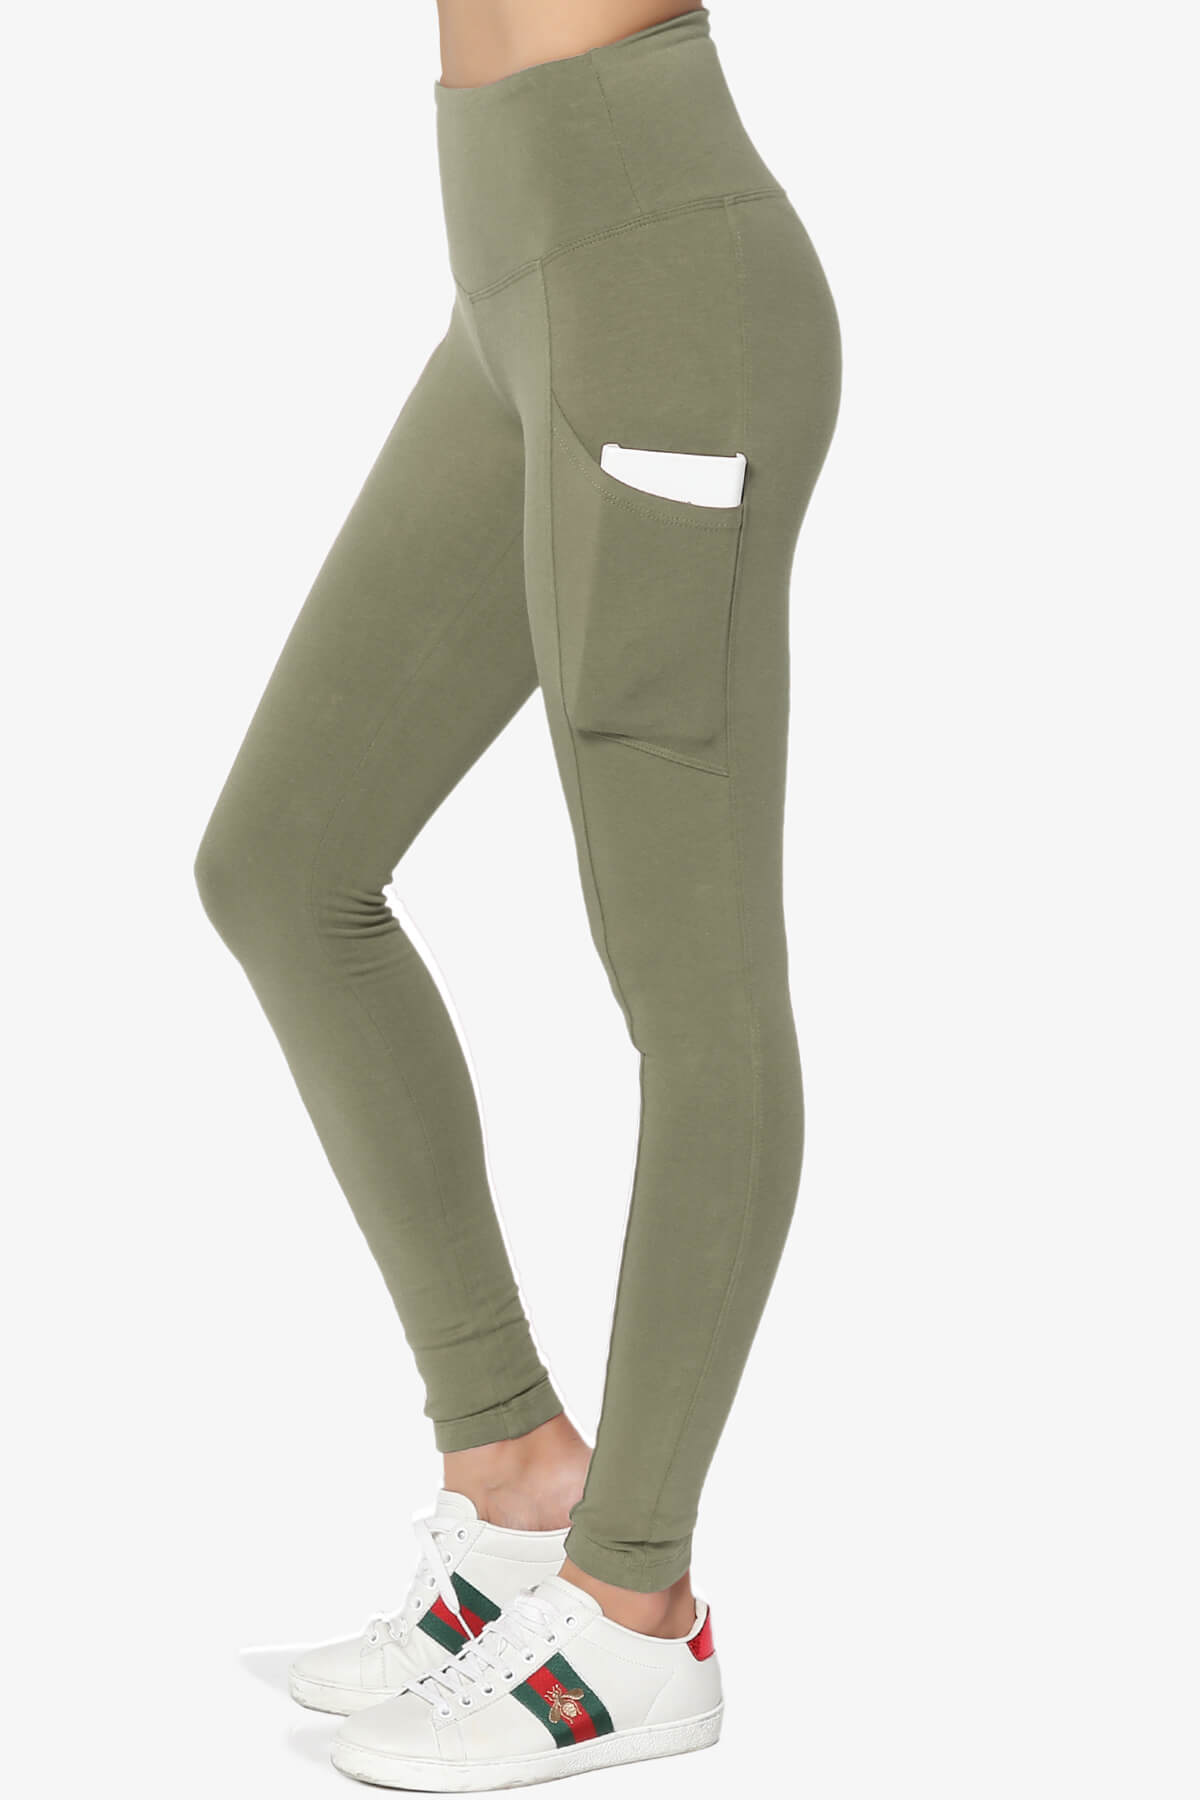 Ansley Luxe Cotton Leggings with Pockets DUSTY OLIVE_1